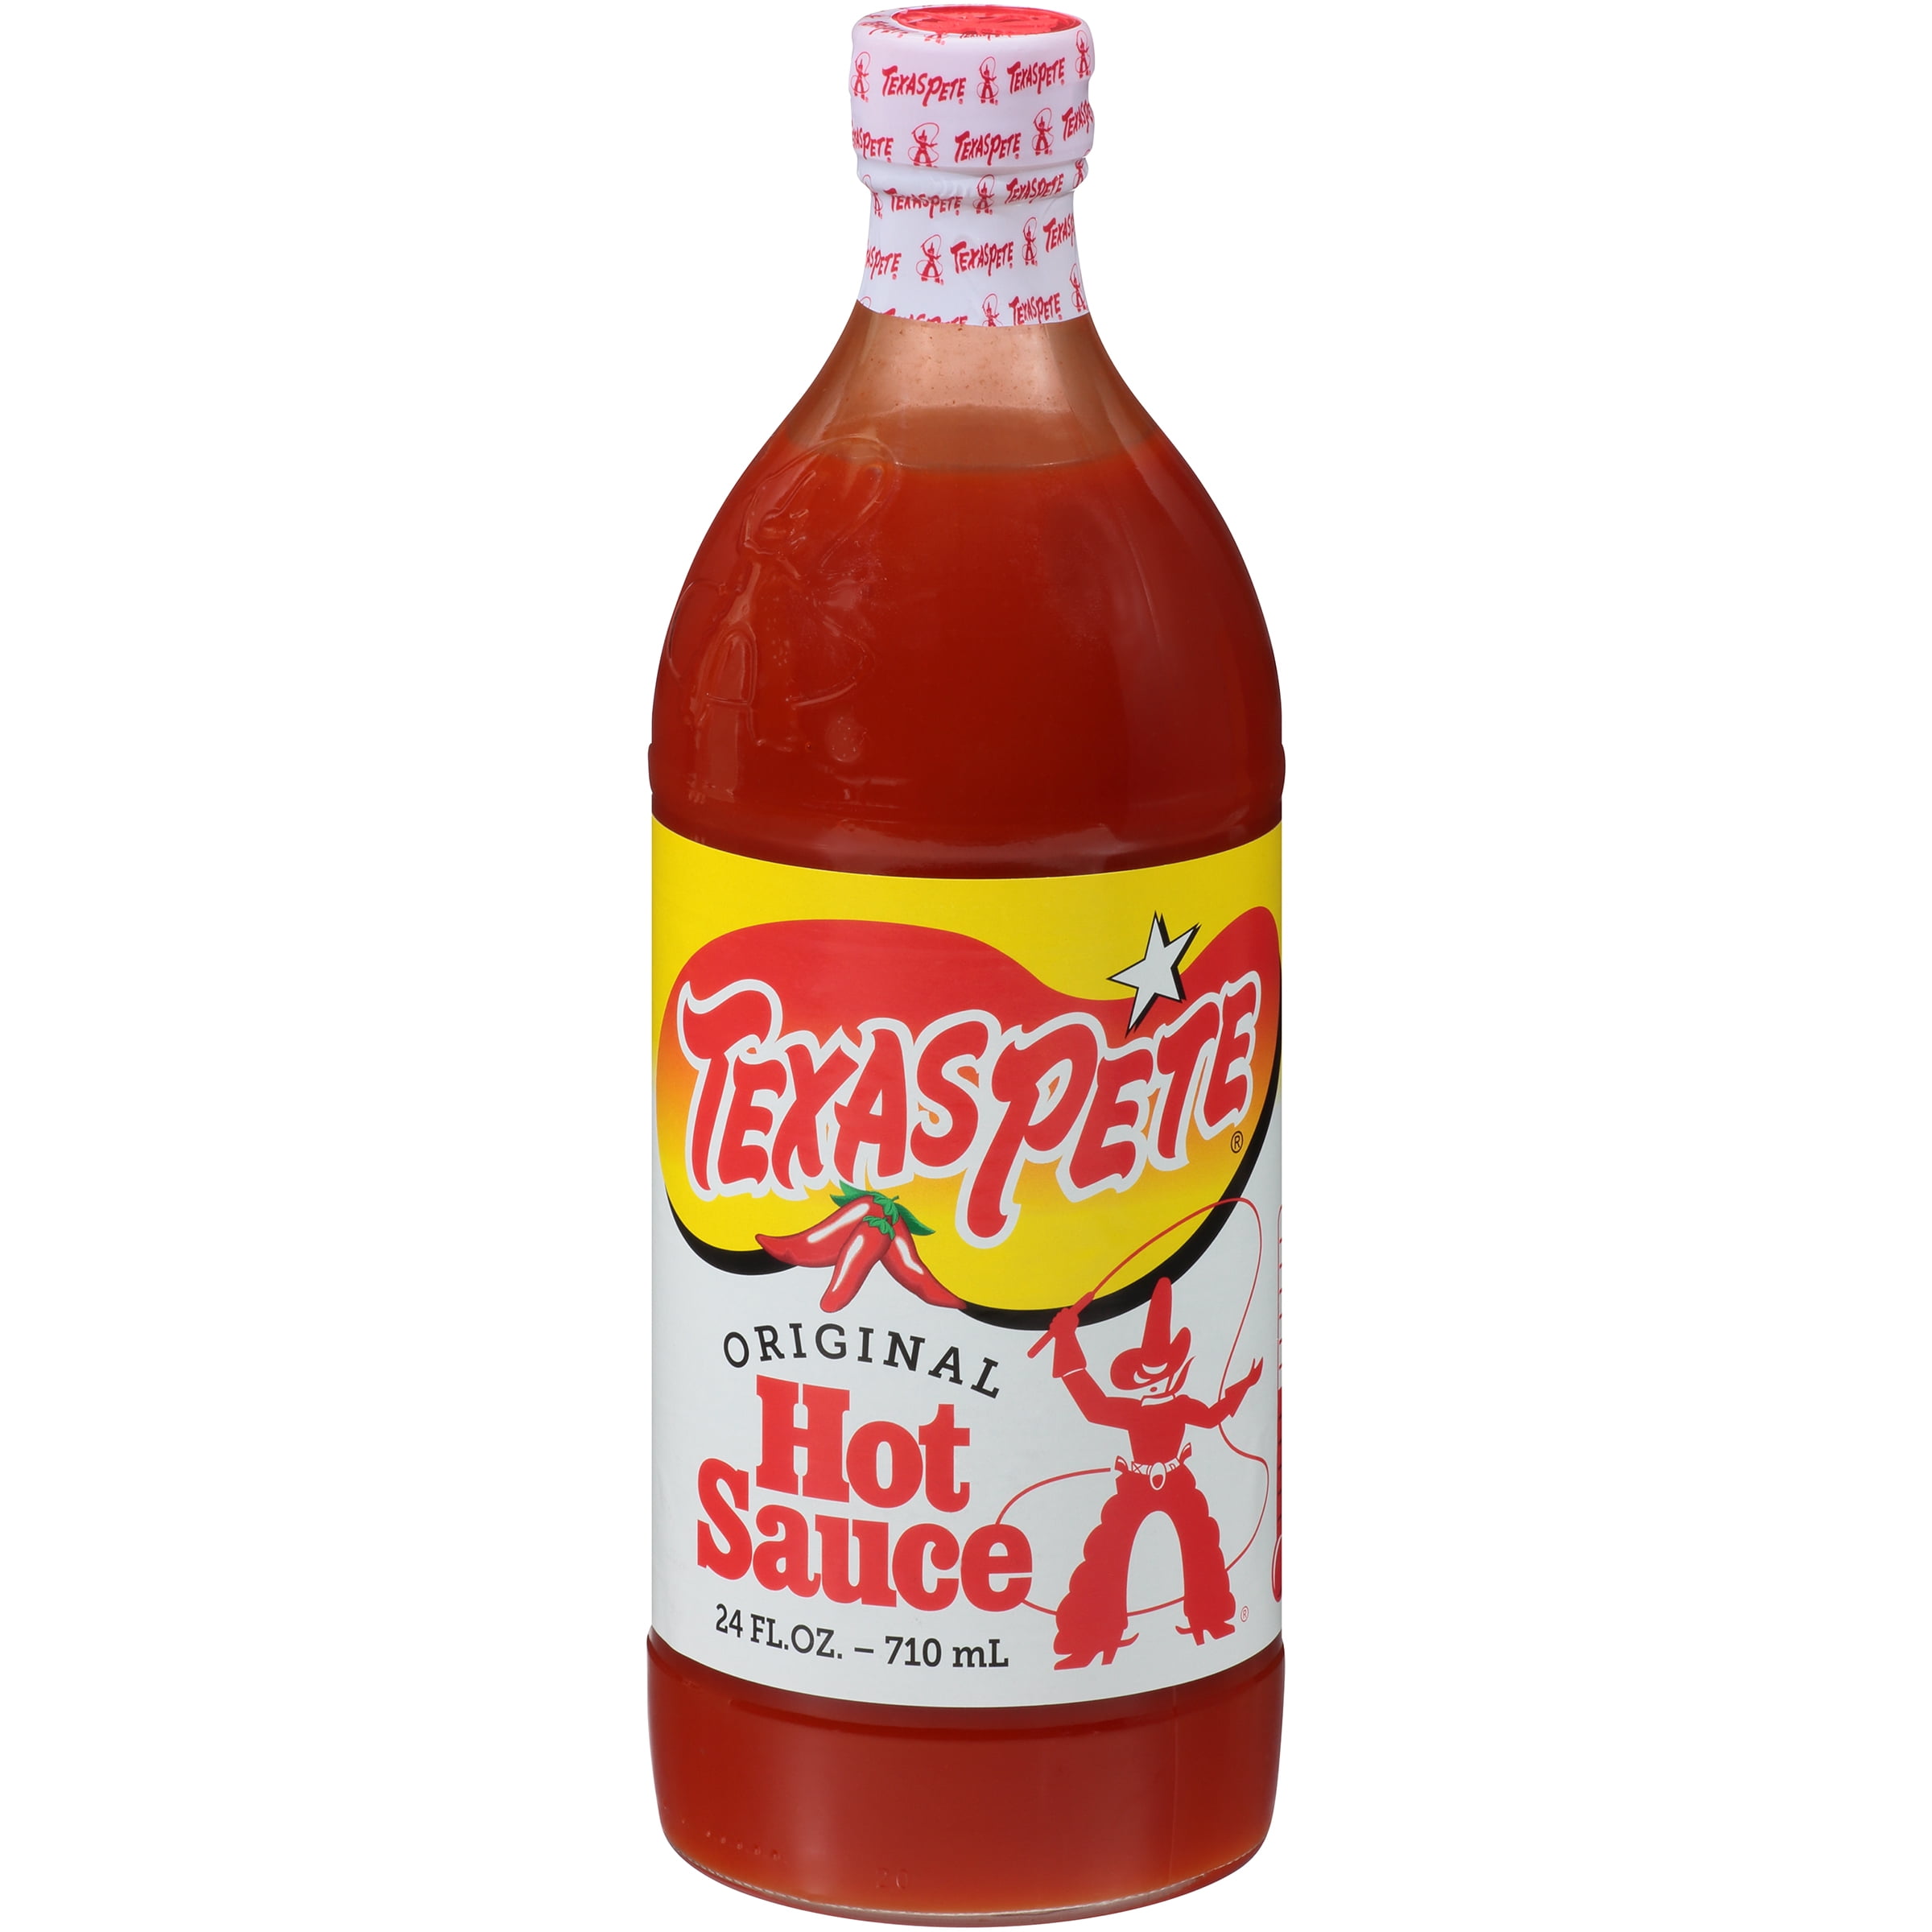 whats in texas pete hot sauce.